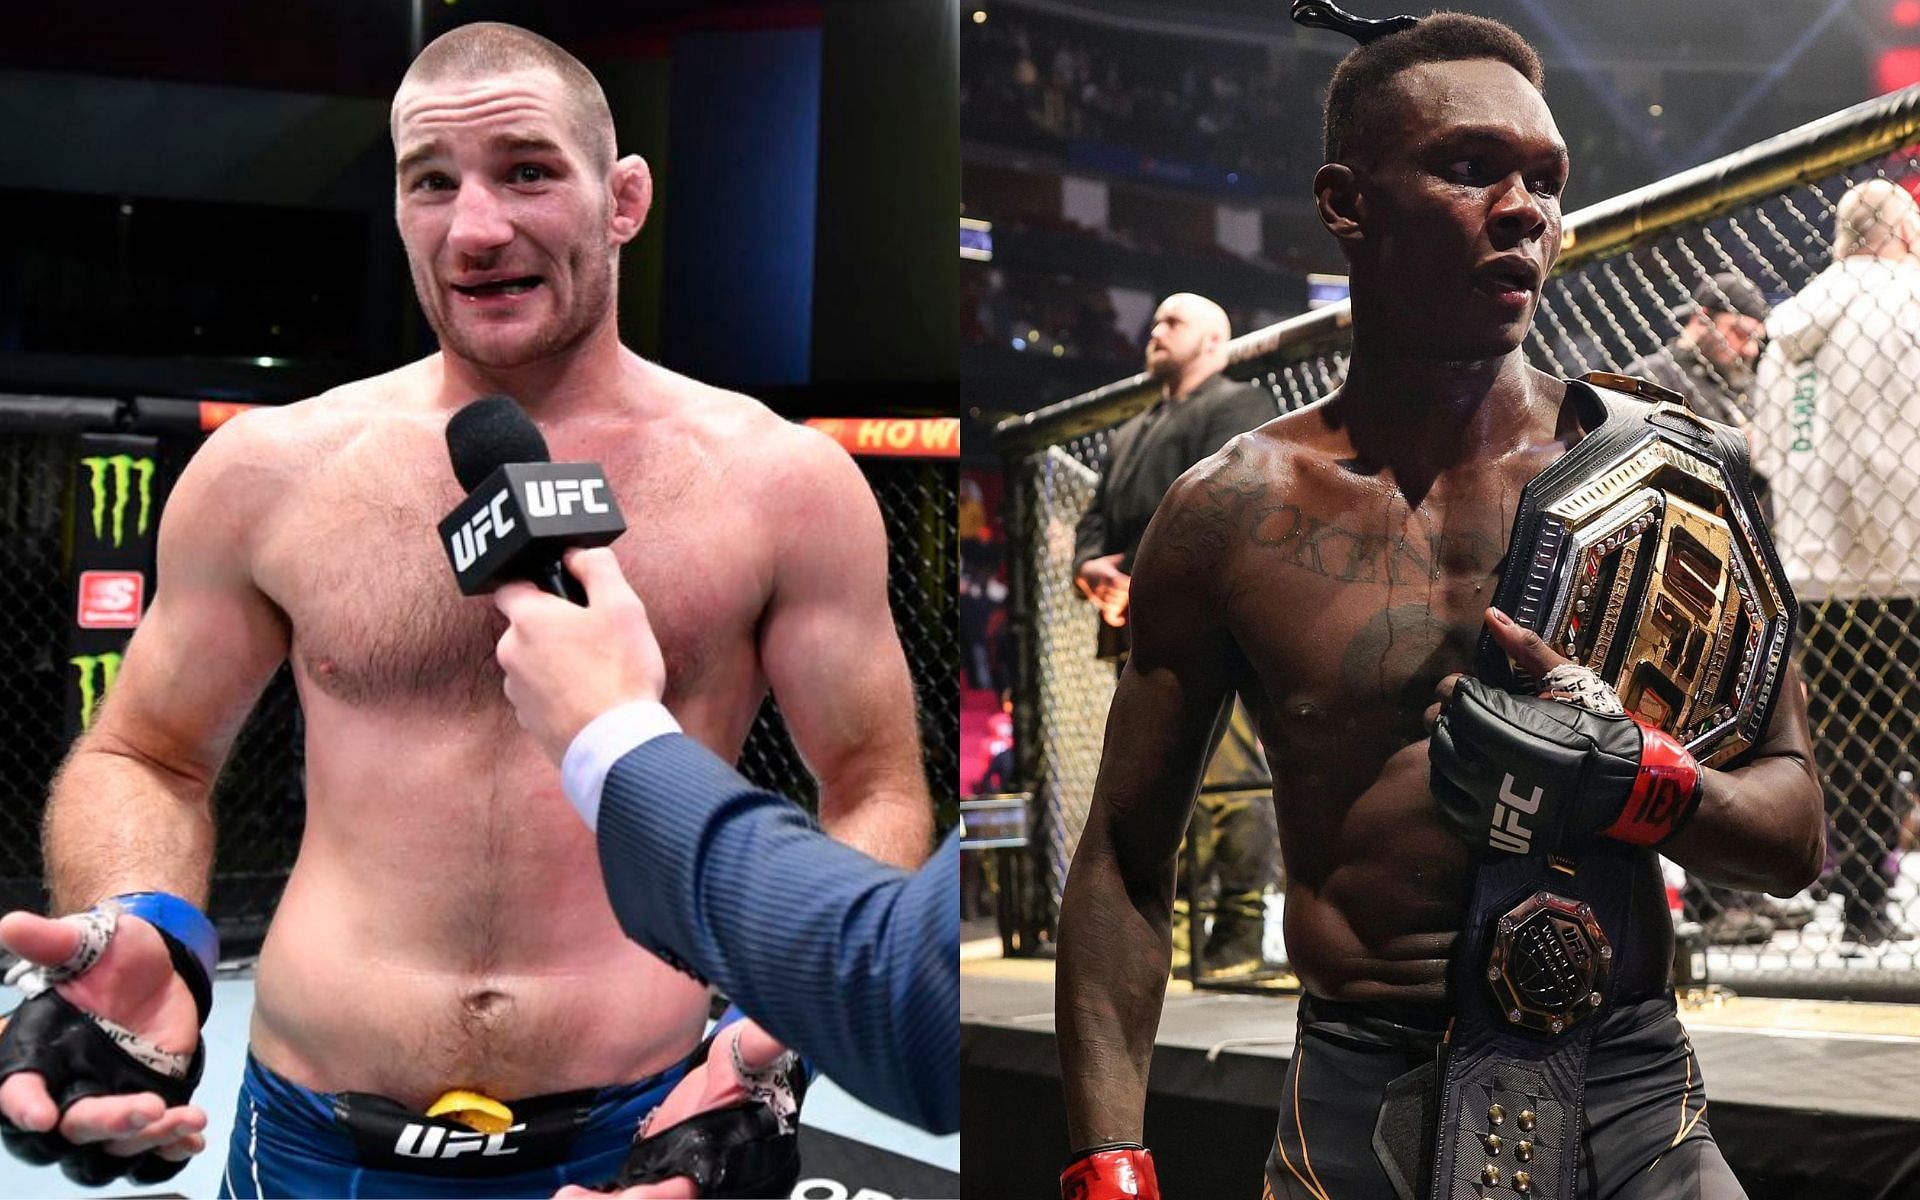 Sean Strickland (left) and Israel Adesanya (right) [Photo credit: @MMAFighting on Twitter]